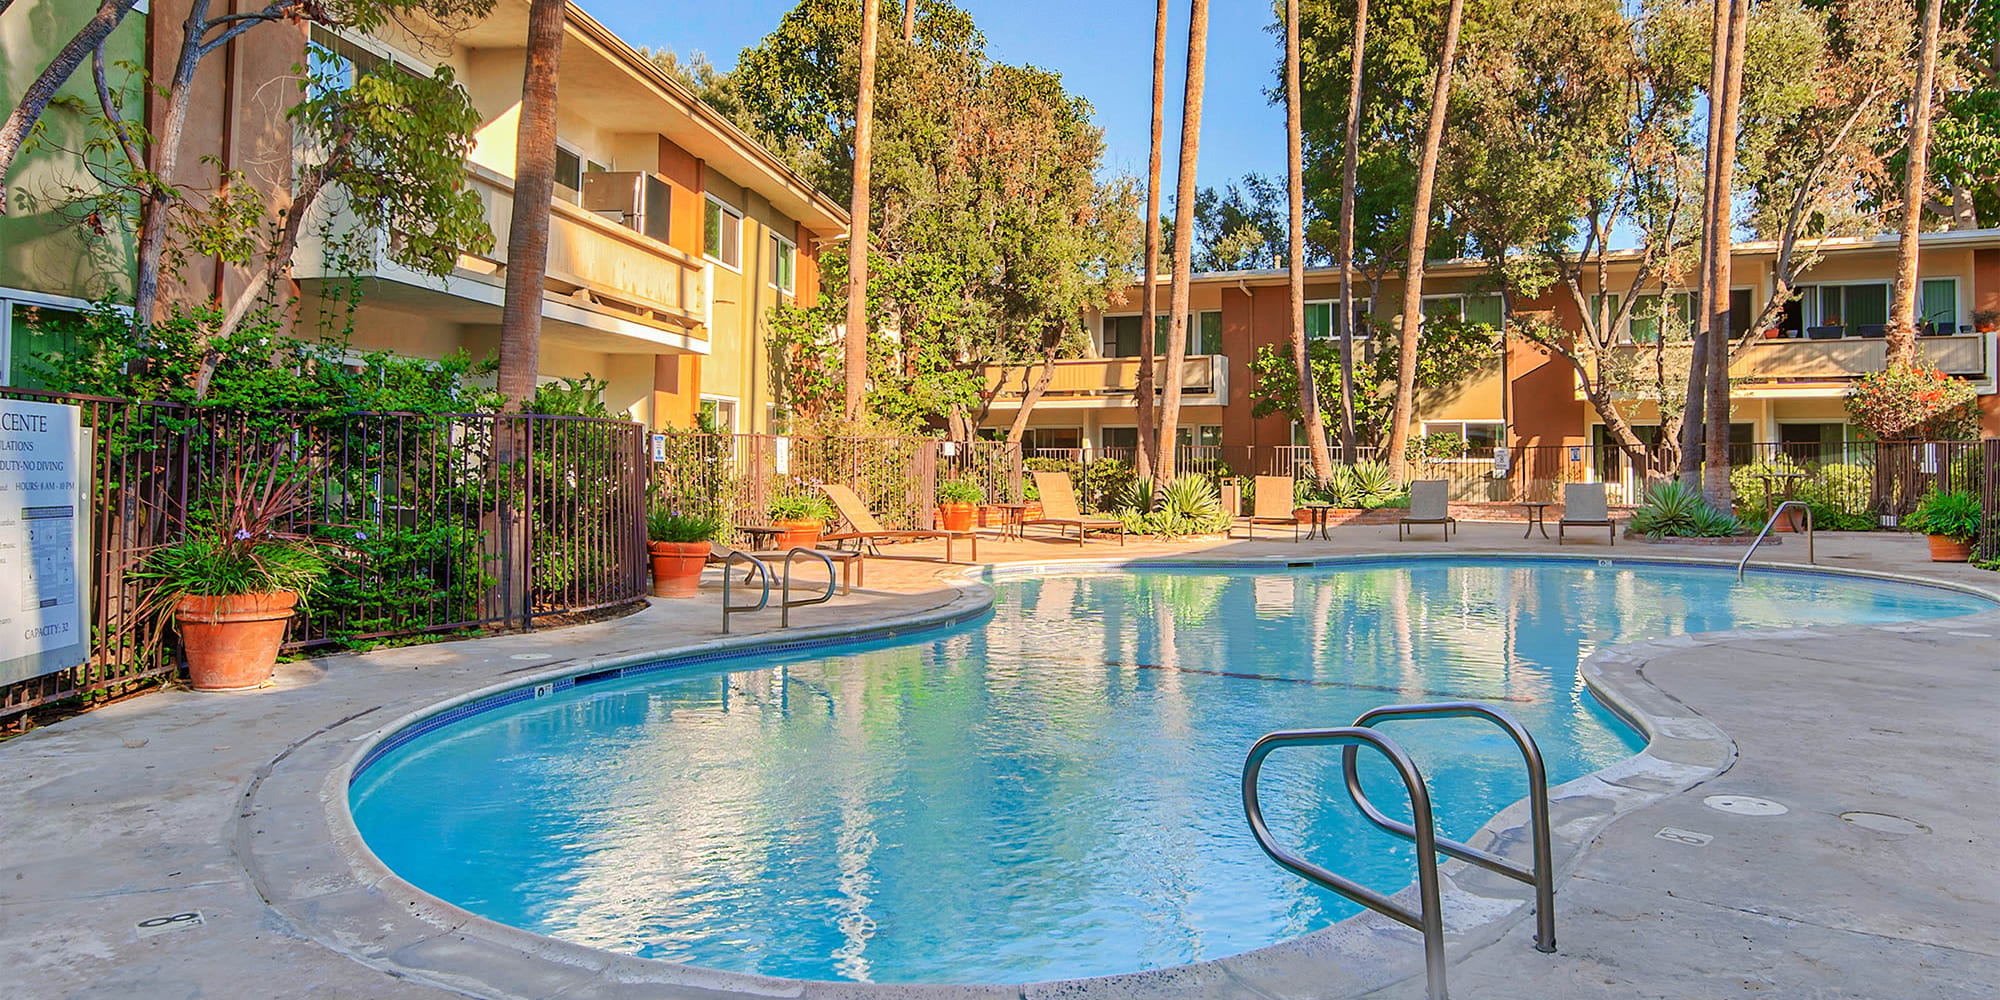 Beautiful morning at the swimming pool area at Villa Vicente in Los Angeles, California